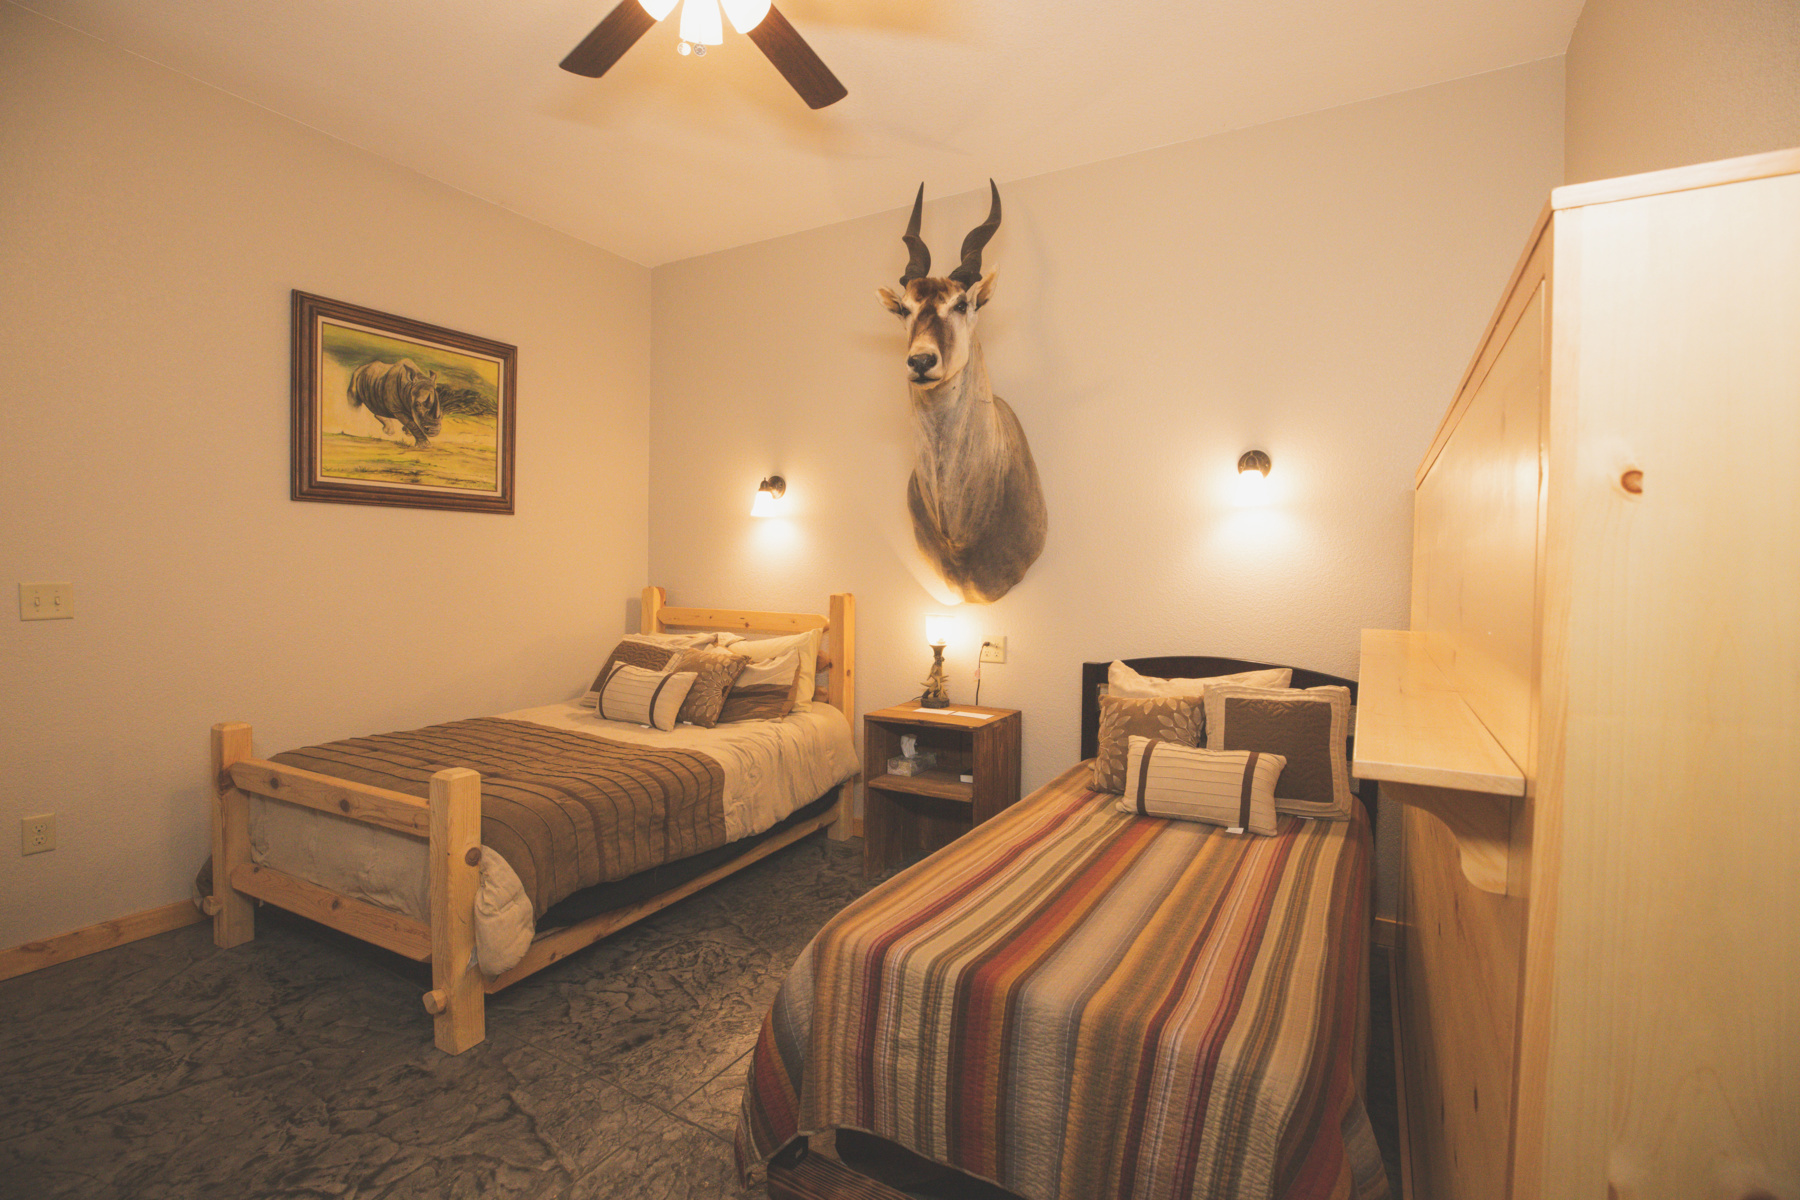 Midwest Whitetail adventures has a new 5100 sqft hunting lodge!